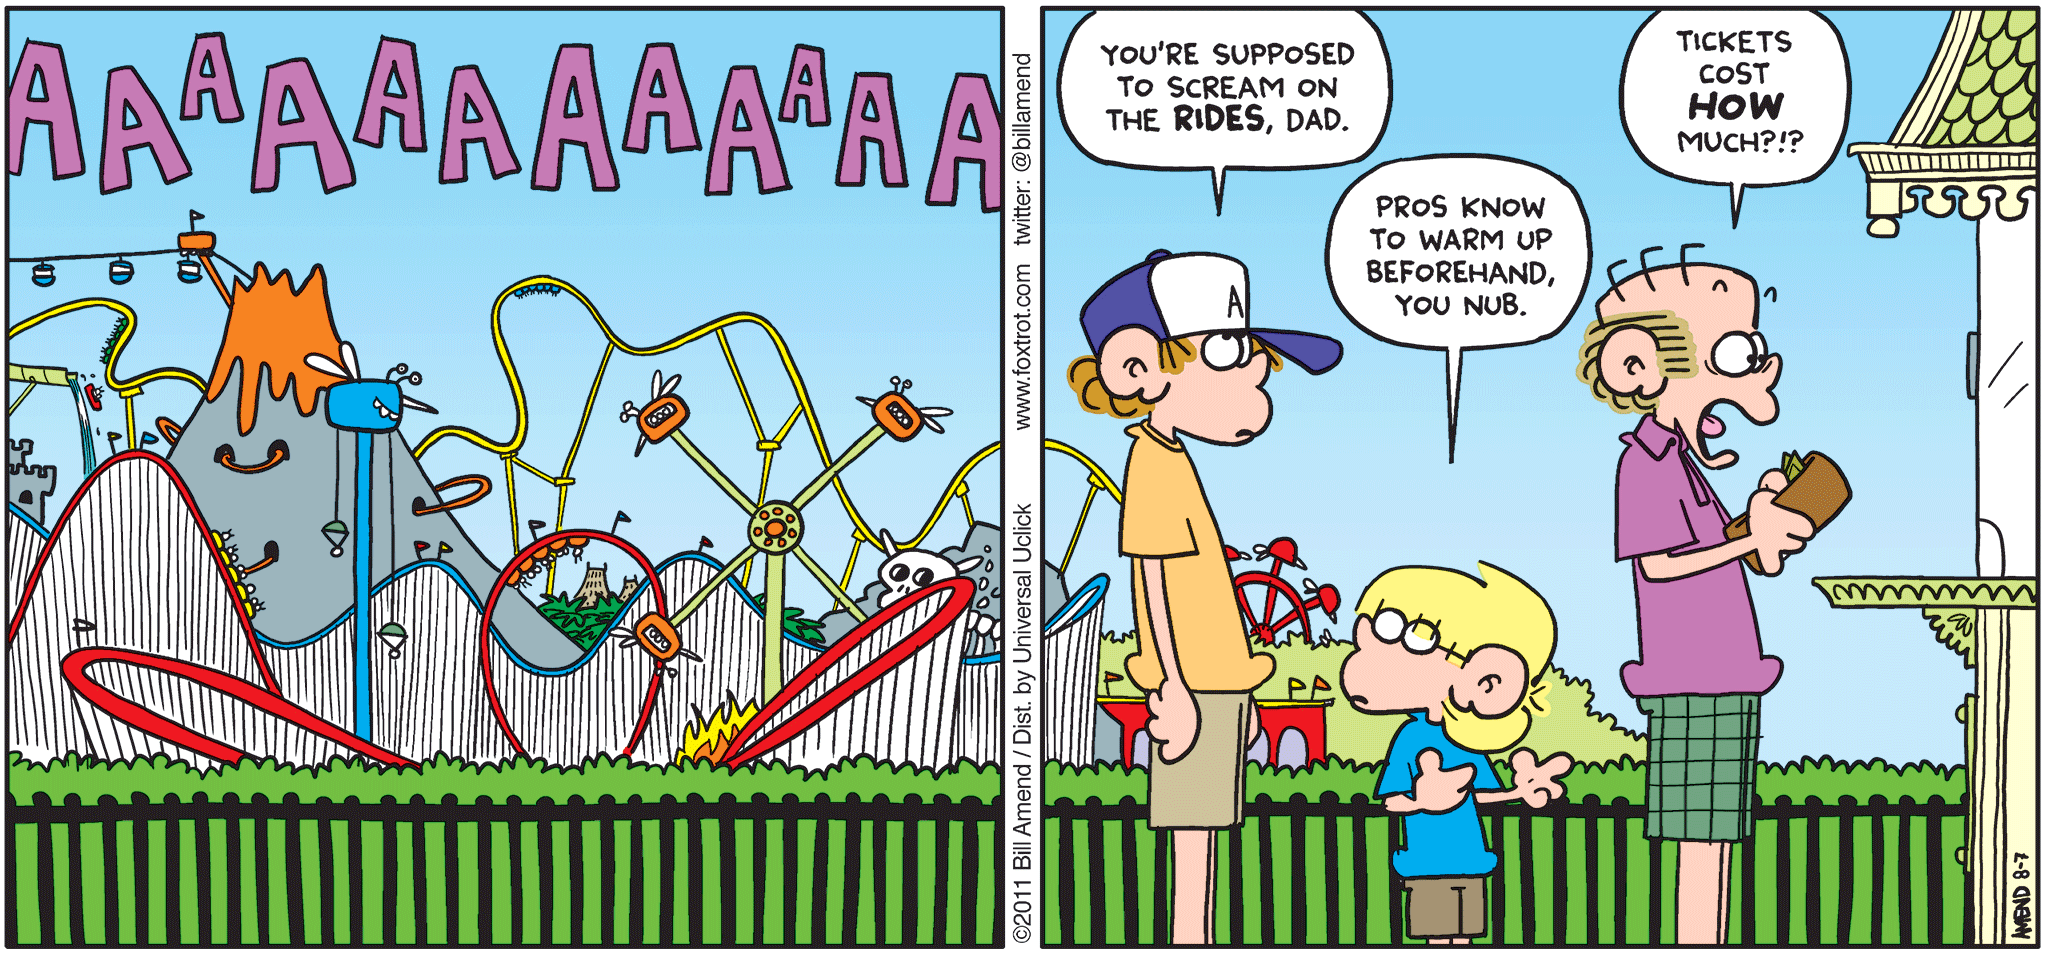 FoxTrot comic strip by Bill Amend - "Fun-Fun Warmups" published August 7, 2011 - Peter: You're supposed to scream on the RIDES, Dad. Jason: Pros know to warm up beforehand, you nub. Roger: Tickets cost HOW much?!?